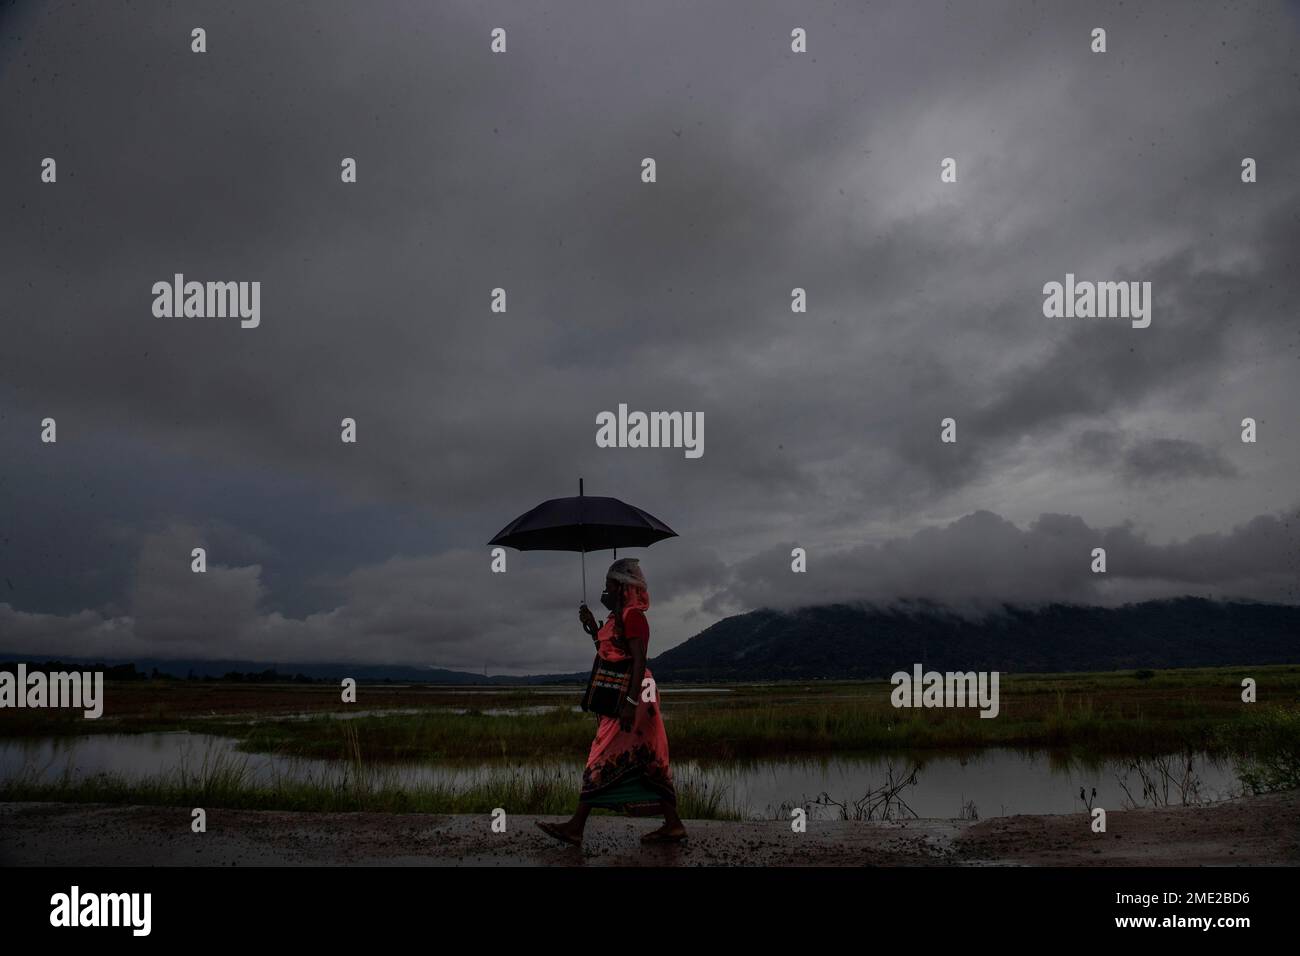 A woman walks with an umbrella during monsoon rain on the outskirts of  Gauhati, India, Friday, July 30, 2021. (AP Photo/Anupam Nath Stock Photo -  Alamy